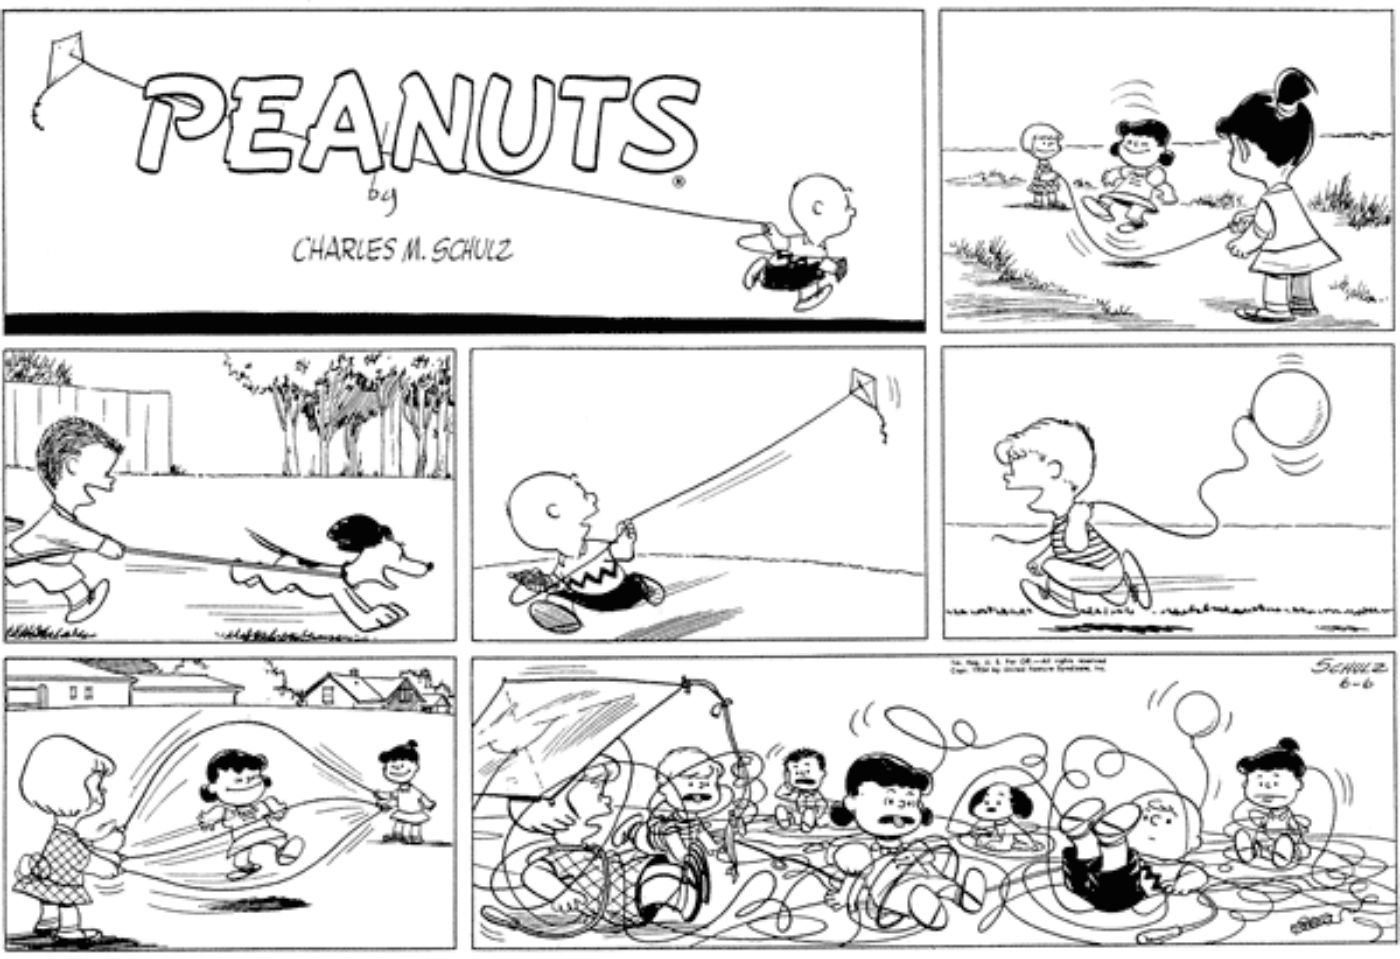 The Peanuts gang getting tangled up in each other's games.